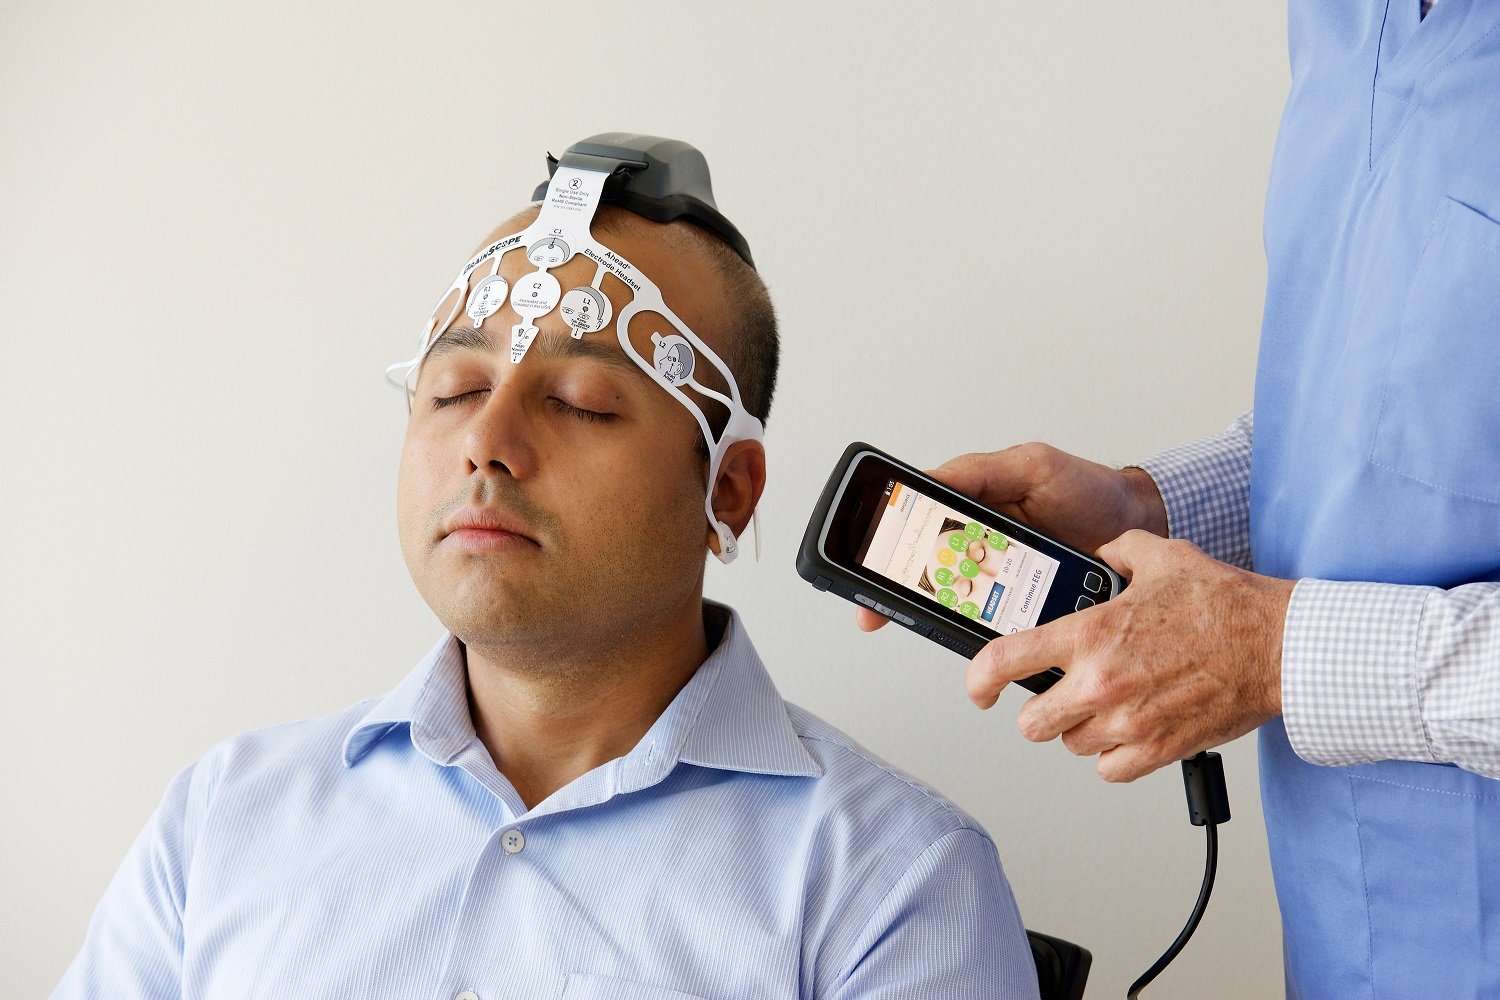 image for Quickly Assessing Brain Bleeding in Head Injuries Using New Device - 04/05/2017